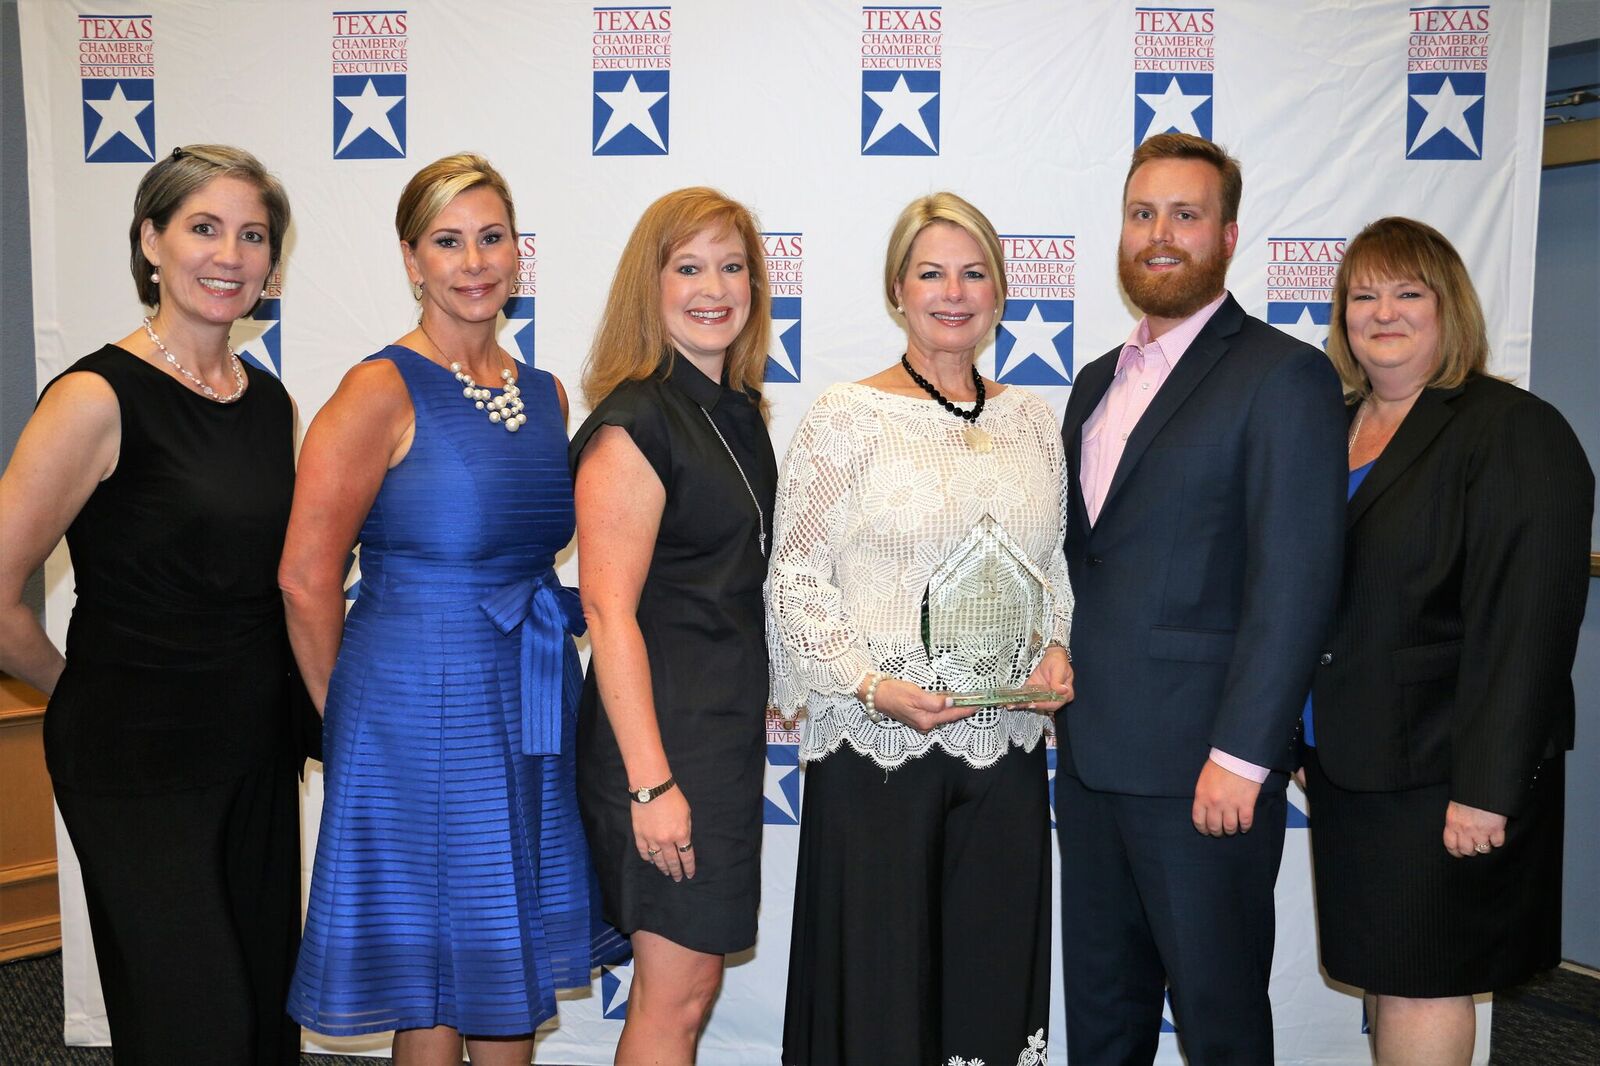 Rockwall Chamber of Commerce recognized for media and communications excellence